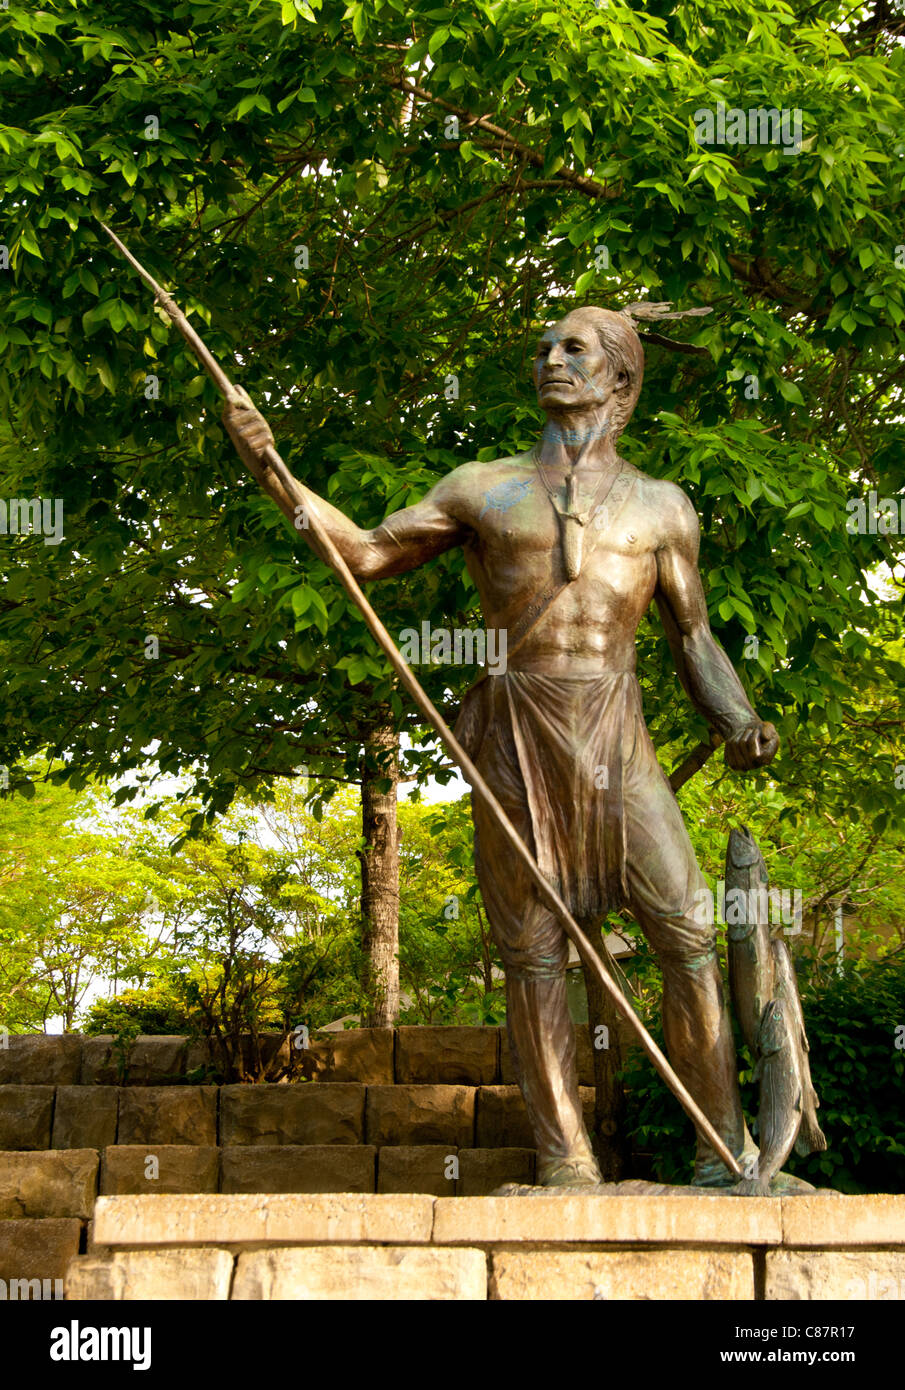 'Cherokee' sculpture by Jud Hartmann stands next to Tennessee Aquarium, Chattanooga, Tennessee, USA Stock Photo